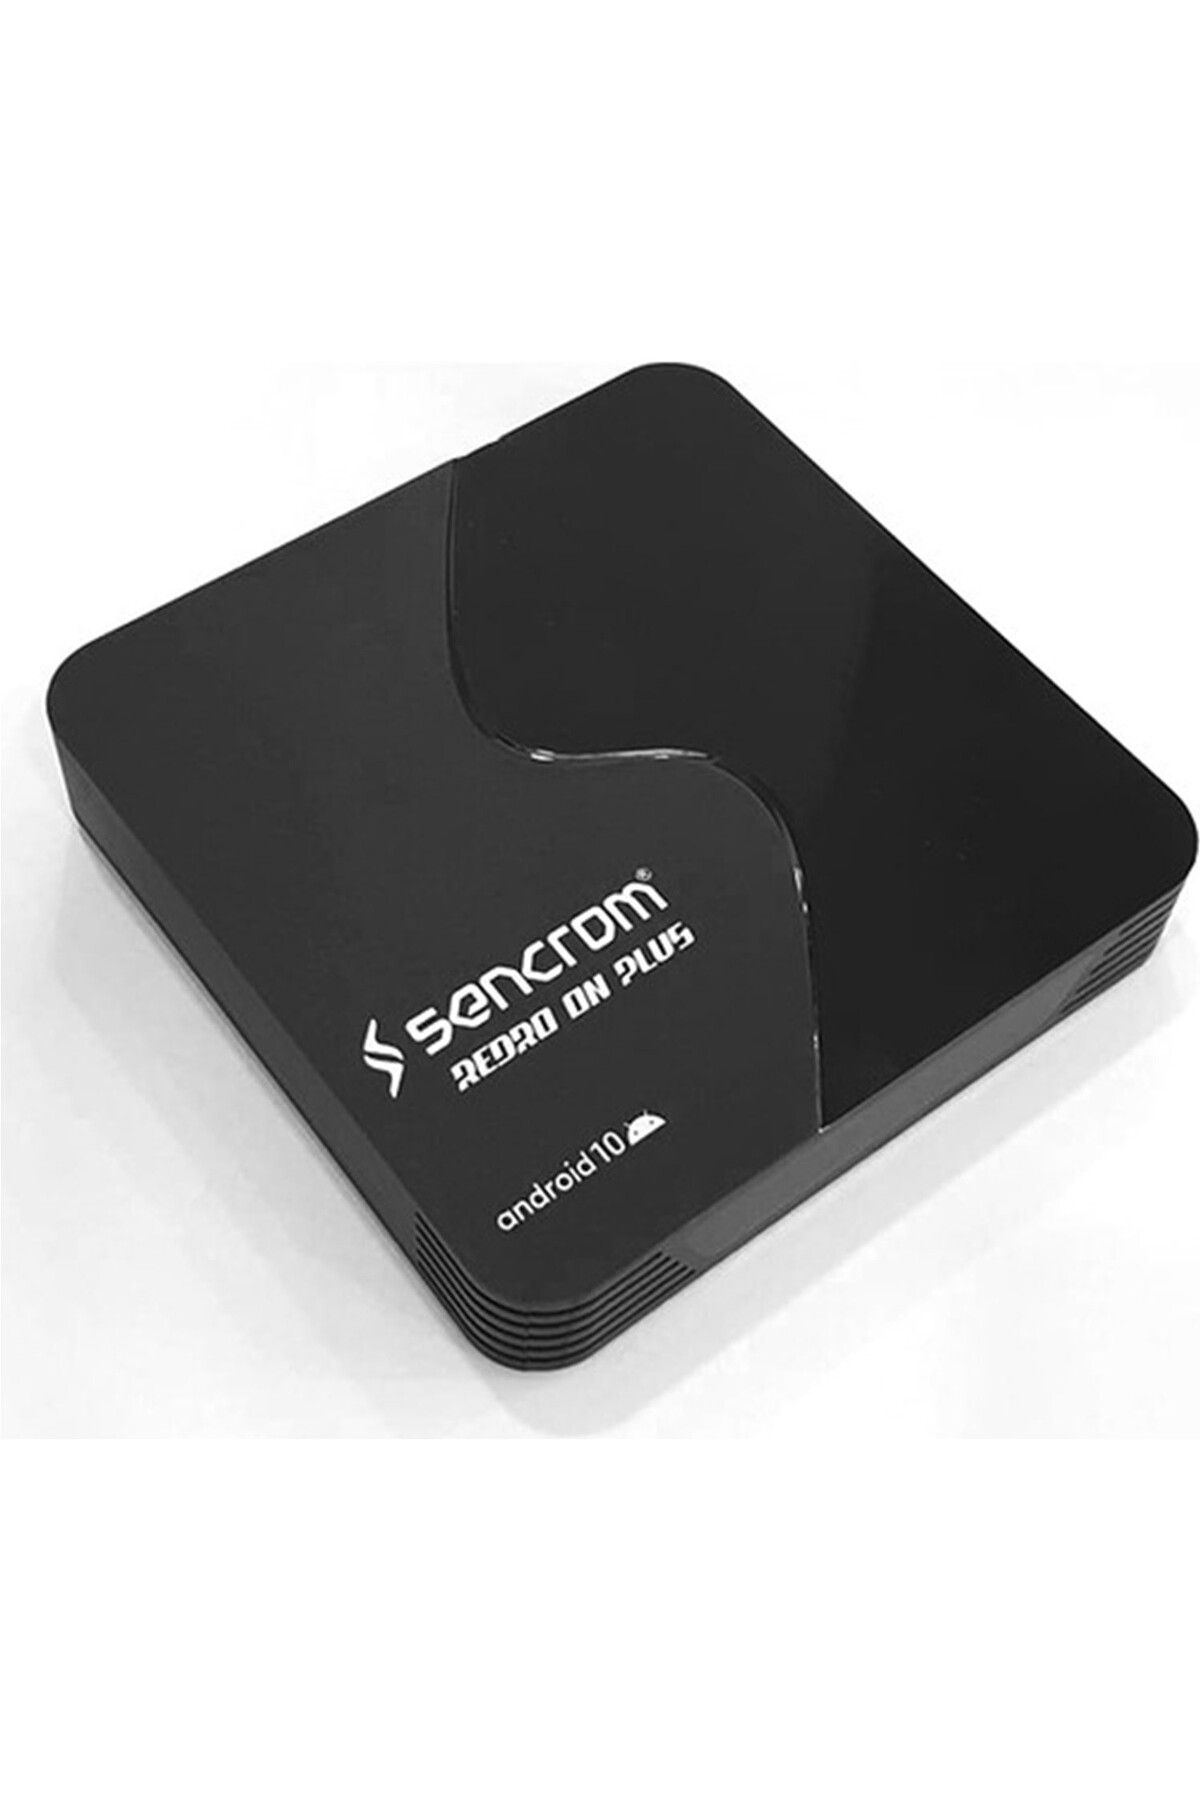 sommeow Redro On Plus 1 Gb Ddr3 8Gb Android Tv Box 111057